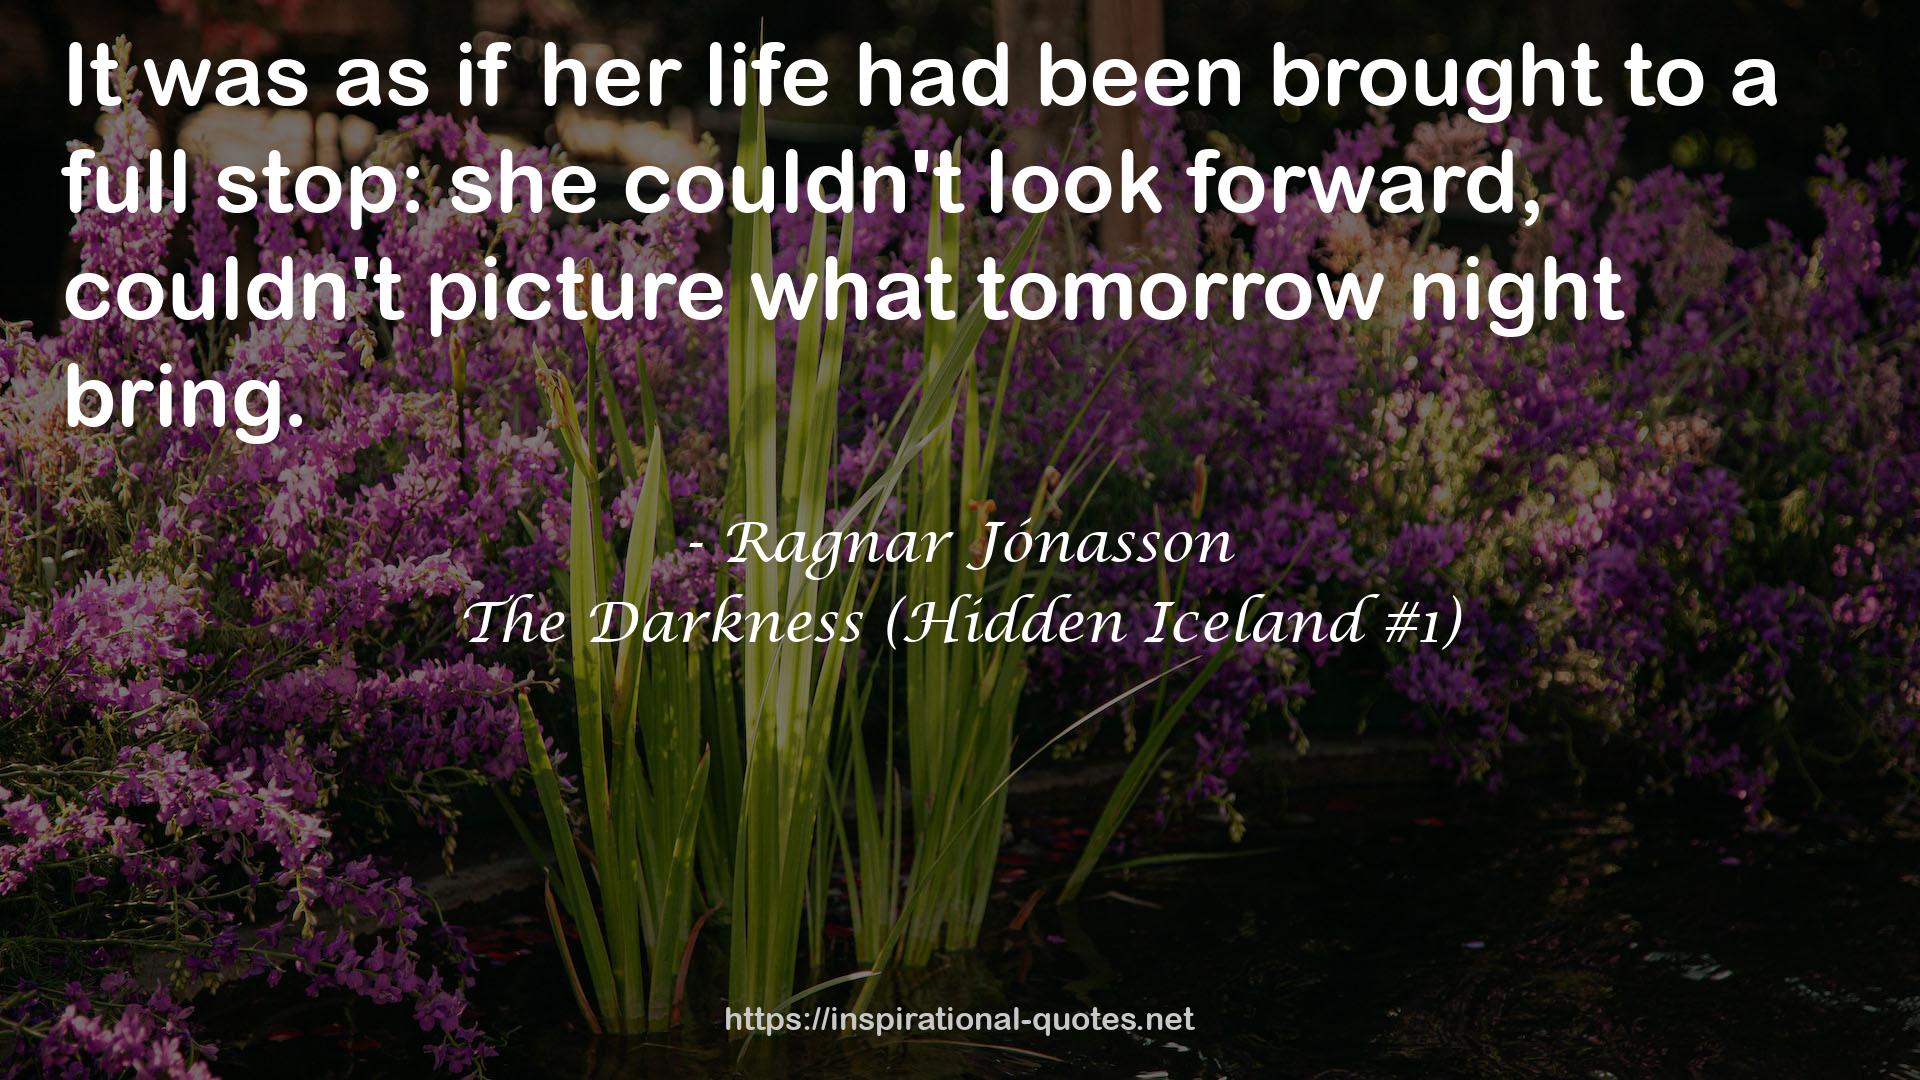 The Darkness (Hidden Iceland #1) QUOTES